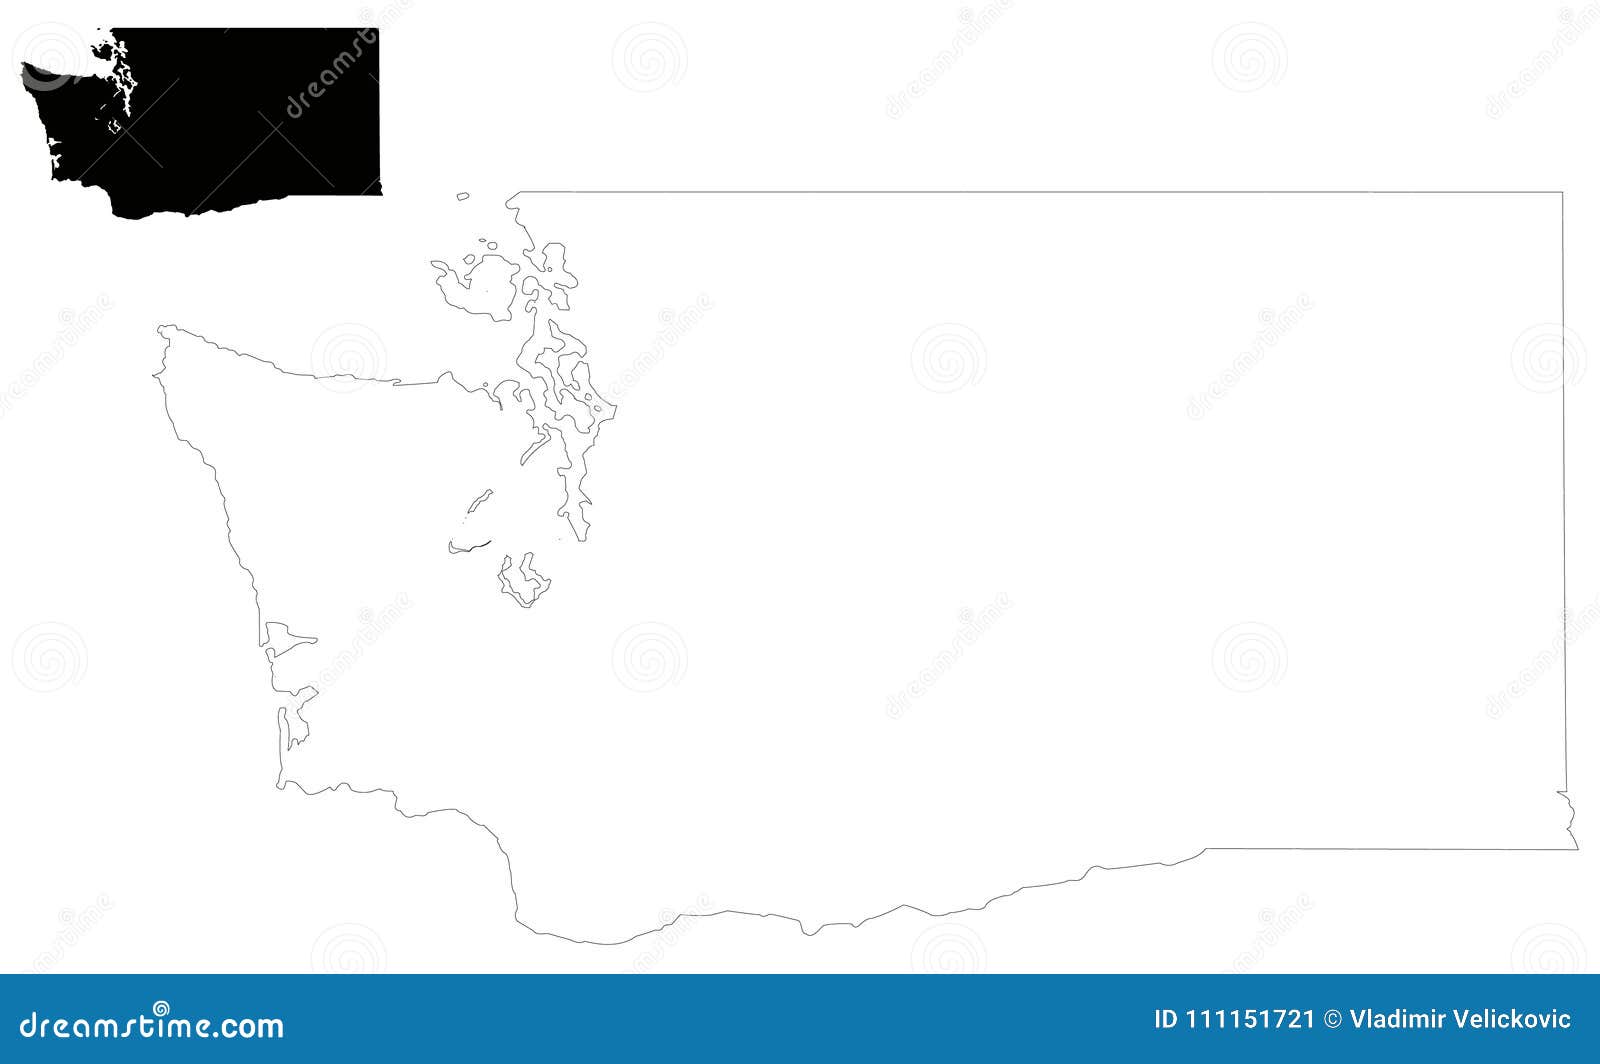 Washington State Map State In The Pacific Northwest Region Of